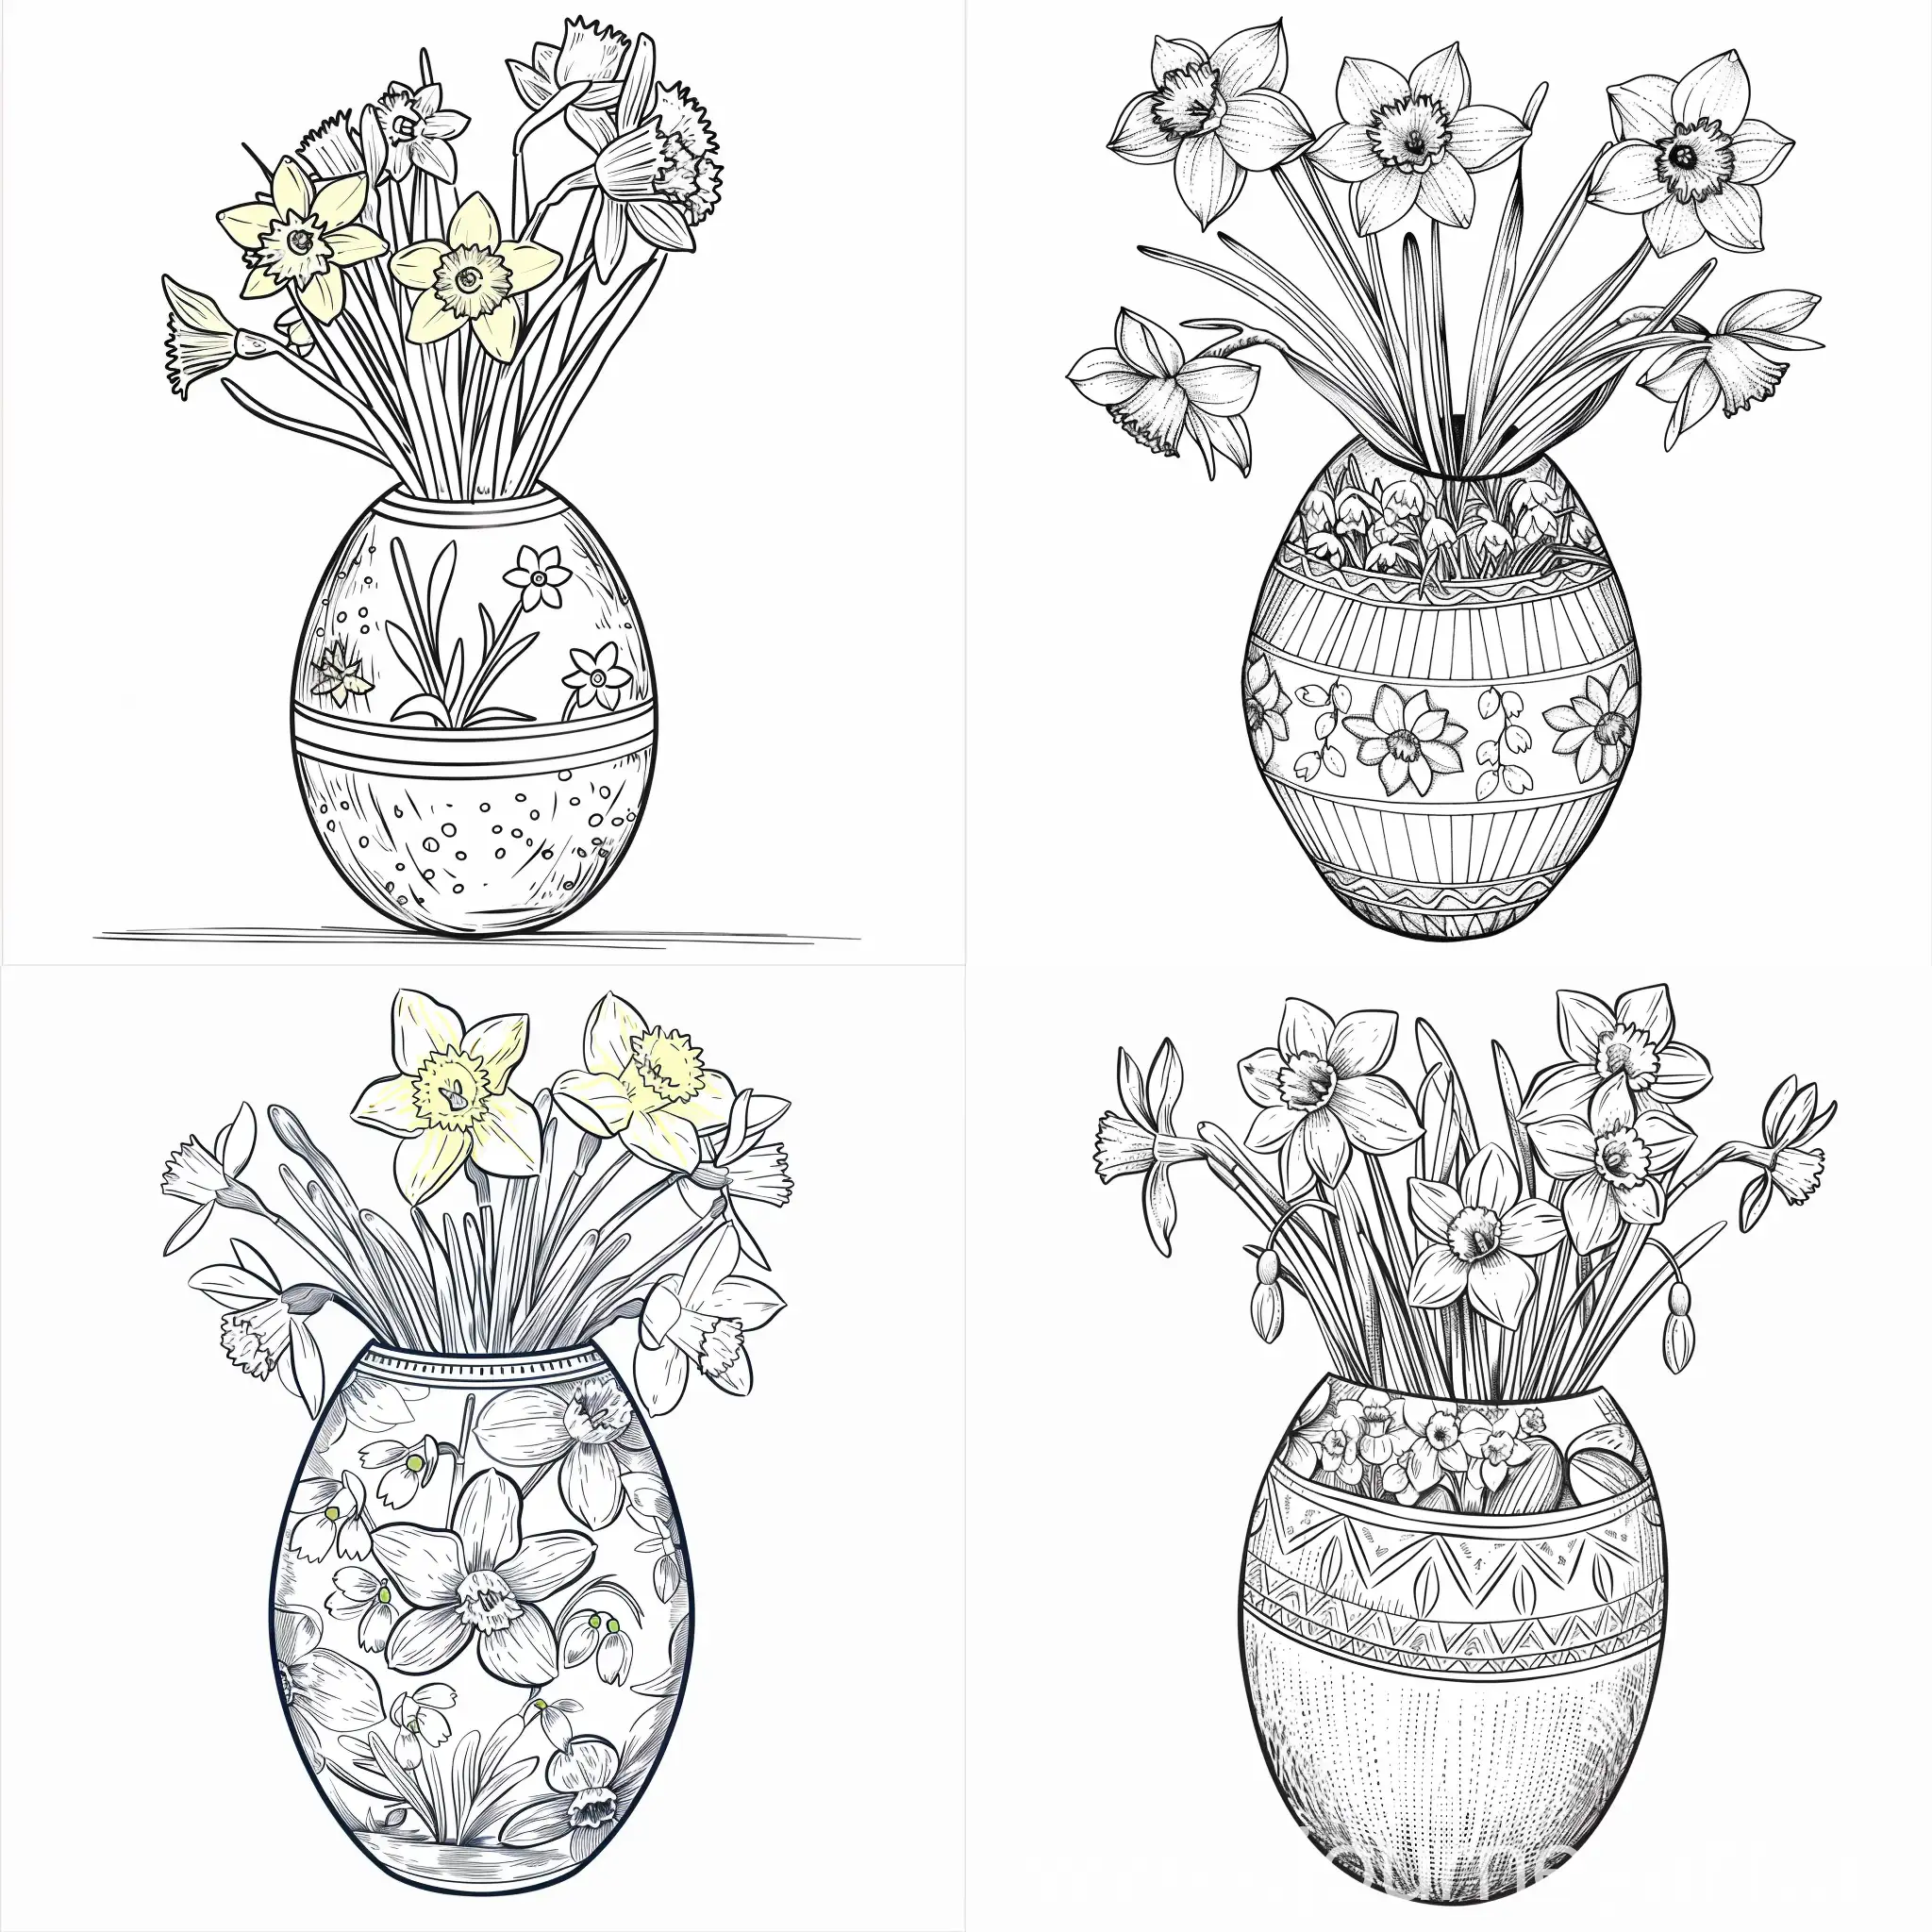 Decorative-Easter-Egg-Vase-with-HandPainted-Daffodils-and-Snowdrops